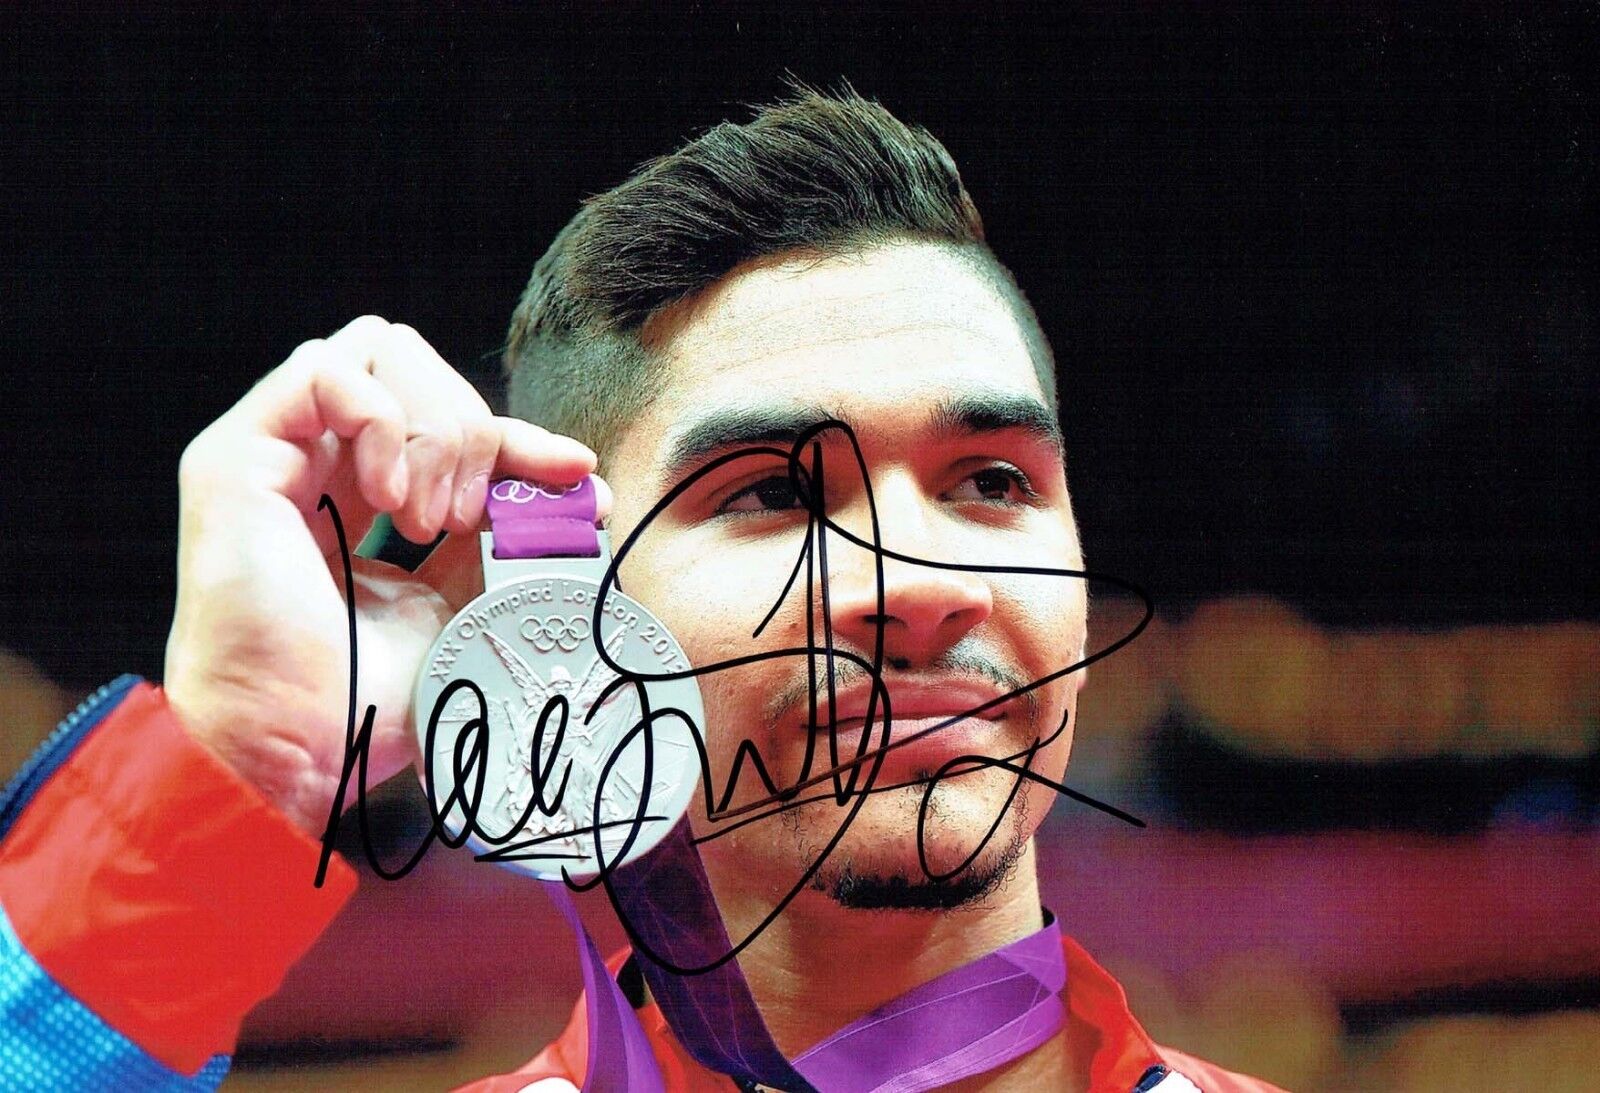 Louis SMITH Autograph Signed 12x8 Photo Poster painting 2 AFTAL COA Olympic Gymnast Medal Winner